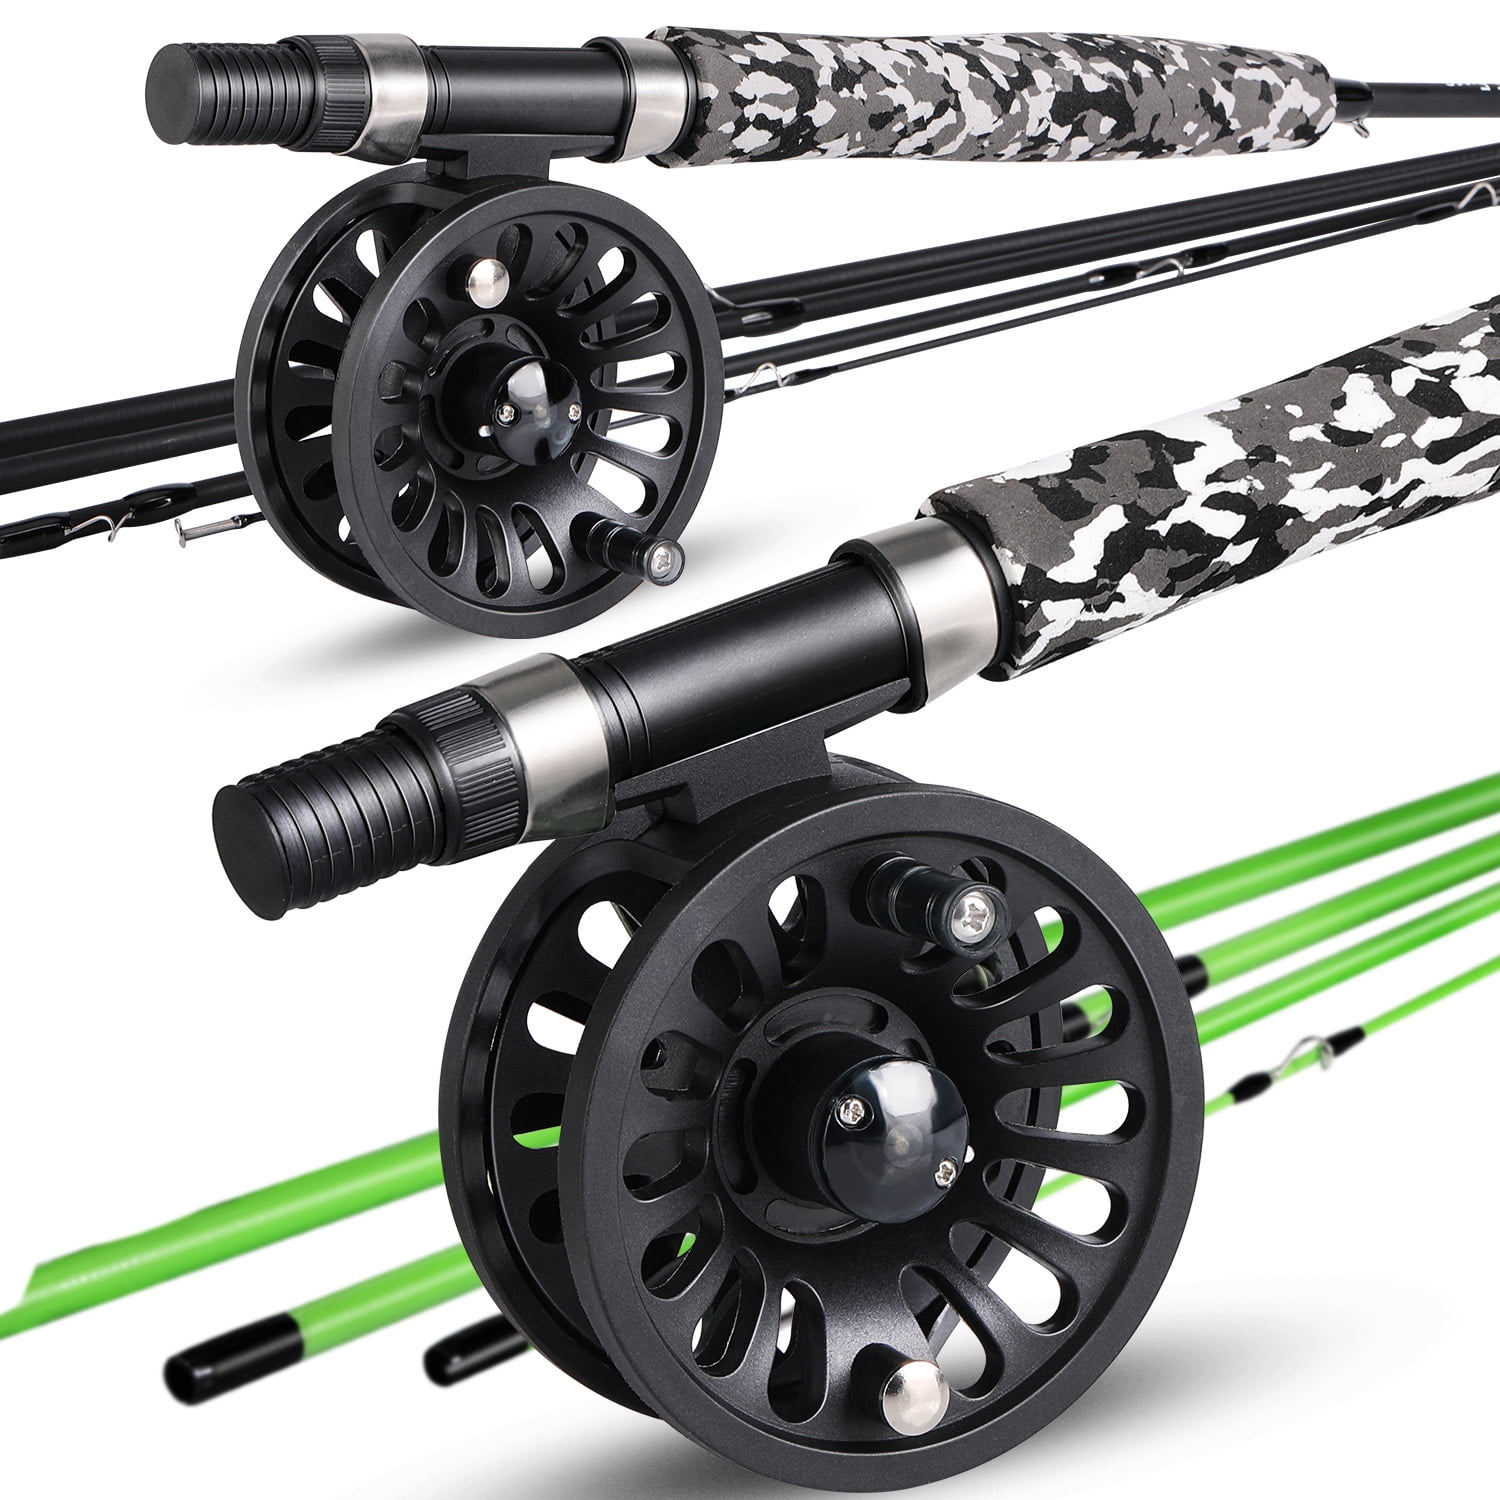  PLUSINNO Telescopic Fishing Rod and Reel Combos Full Kit,  Carbon Fiber Fishing Pole, 12 +1 Shielded Bearings Stainless Steel BB Spinning  Reel(2pack) : Sports & Outdoors